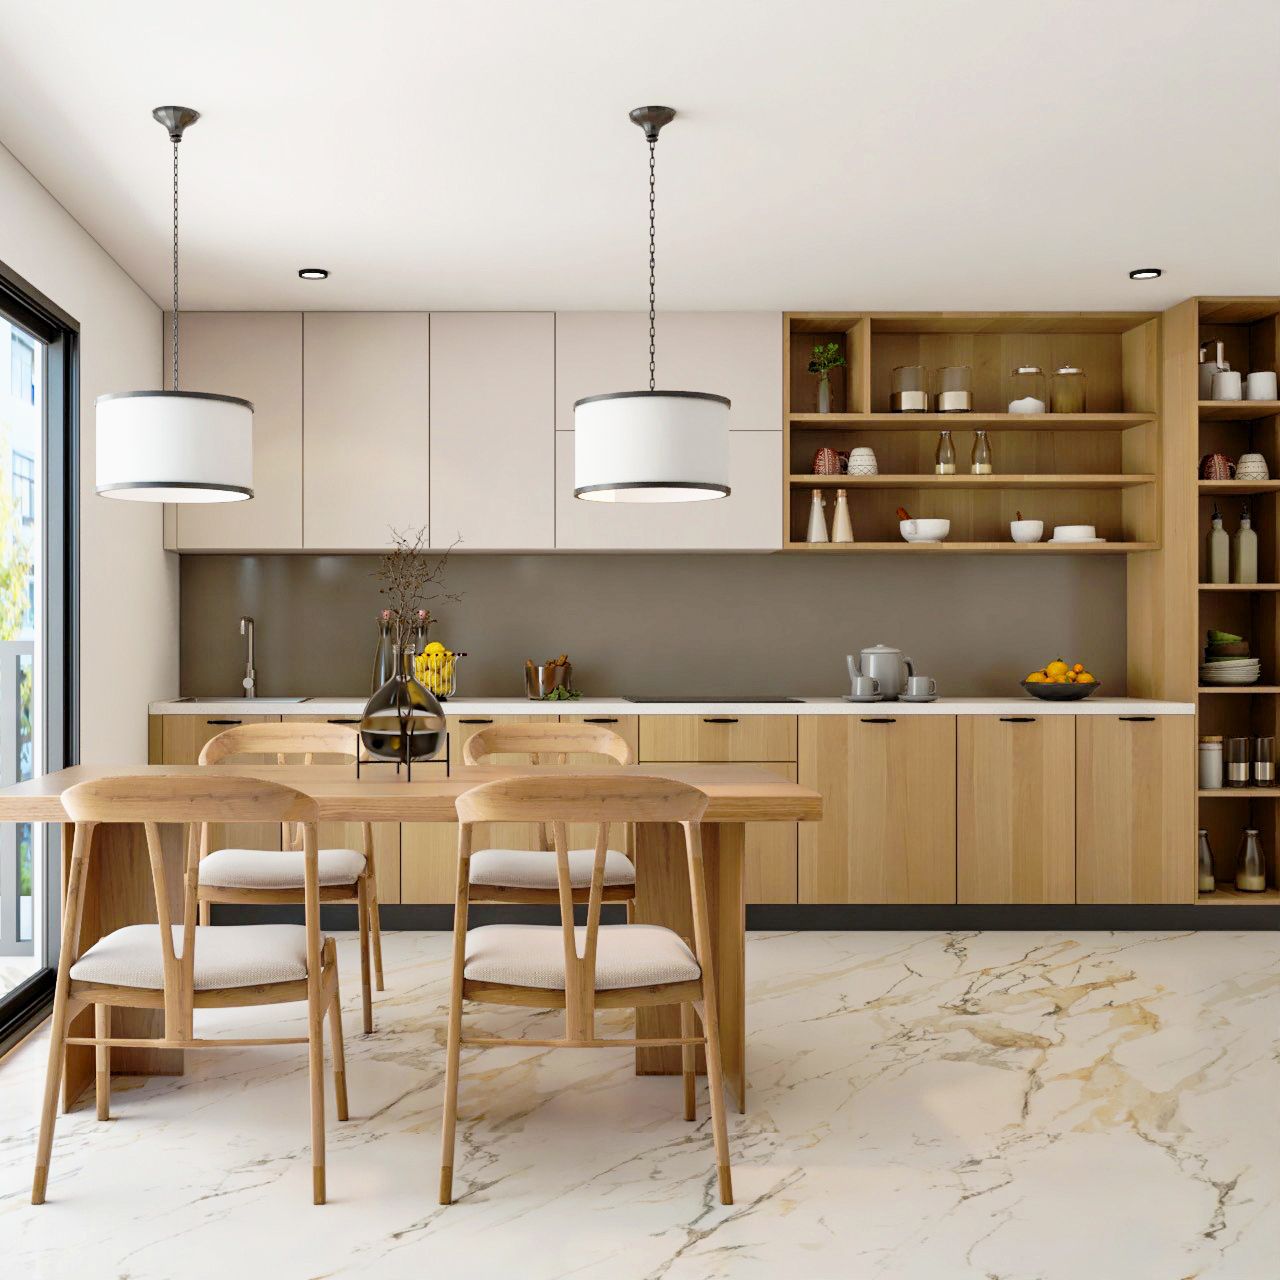 Classic Modular Wooden Open Kitchen Design With Integrated Dining Table